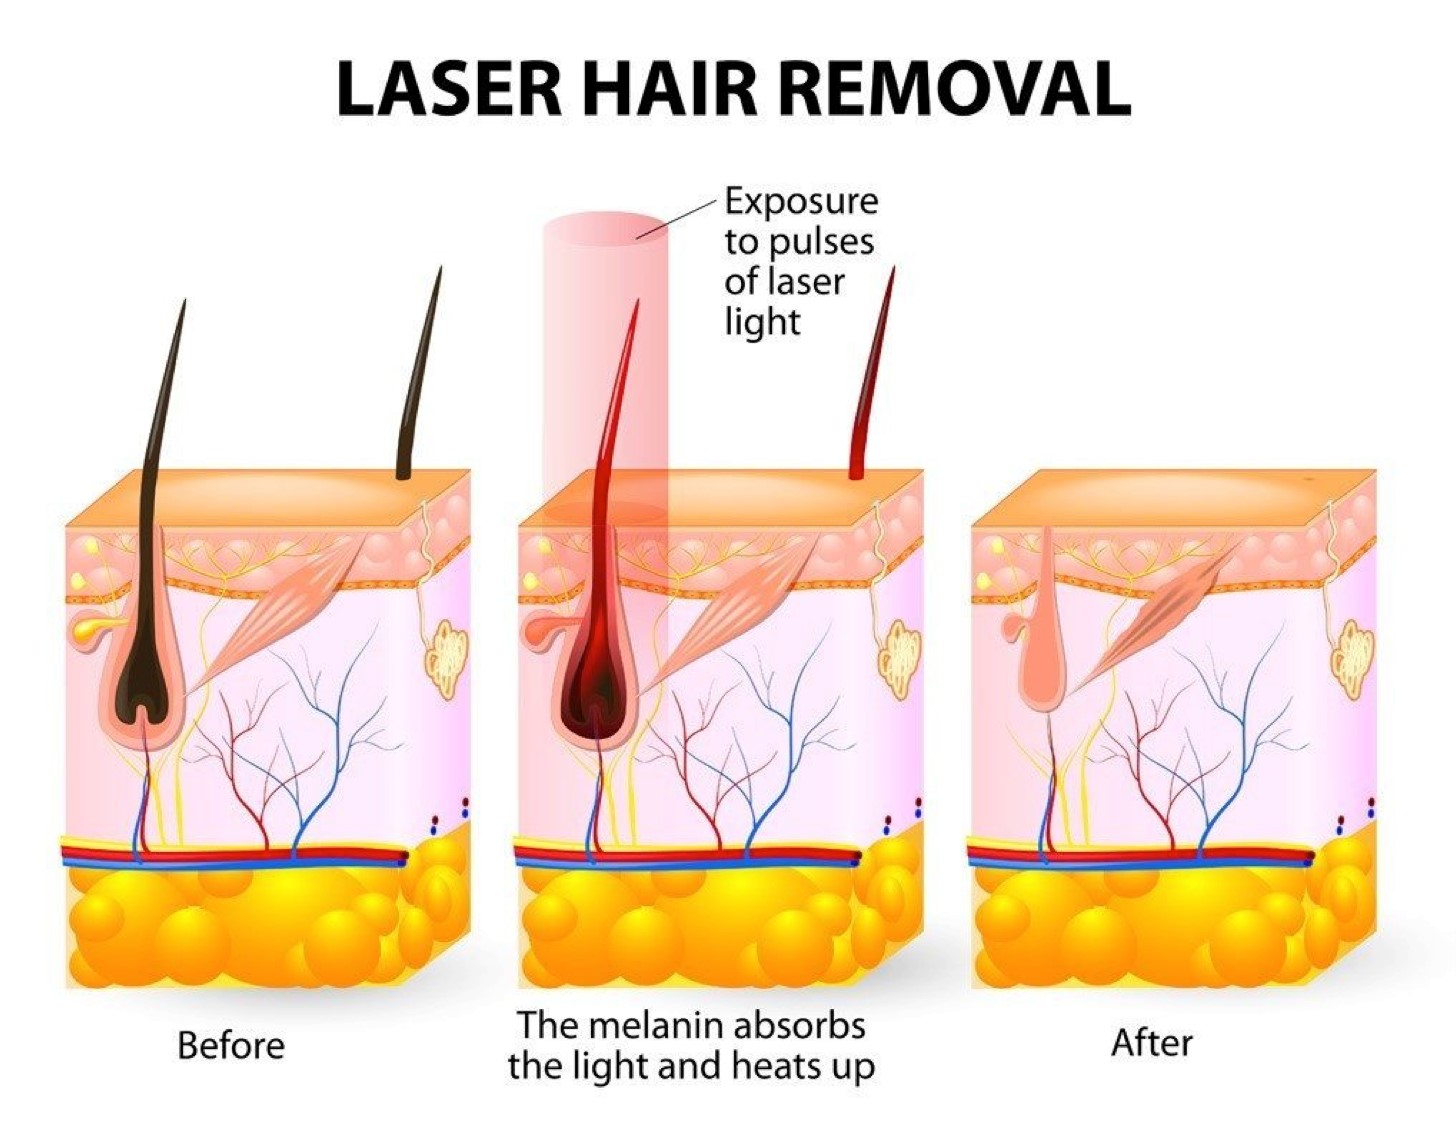 The principle of laser hair removal